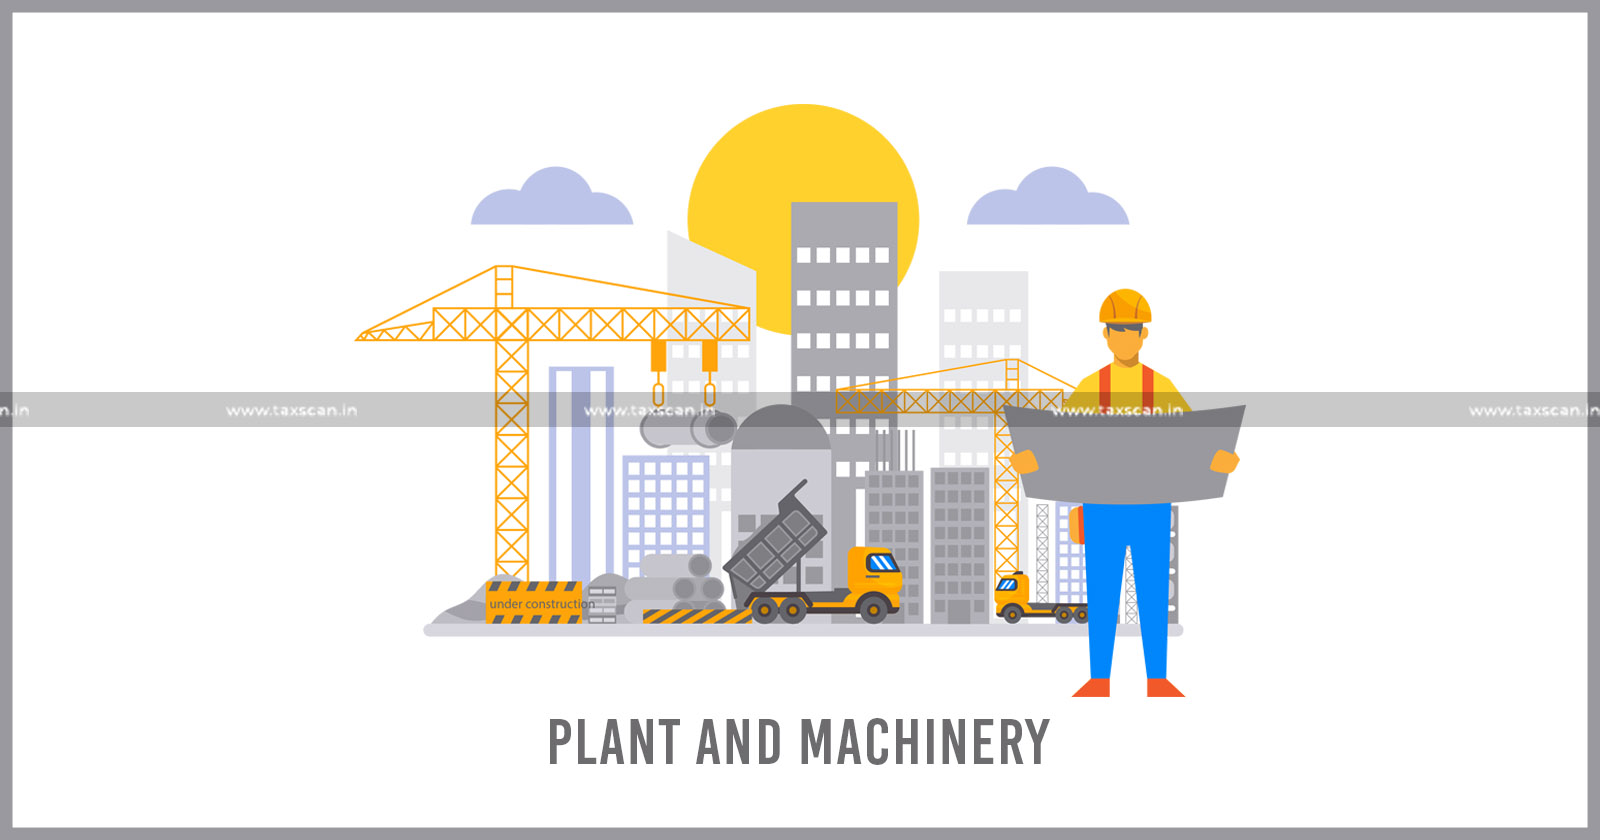 ITC - Machinery - AAR - Plant and Machinery - Definition of Plant and Machinery - Taxscan